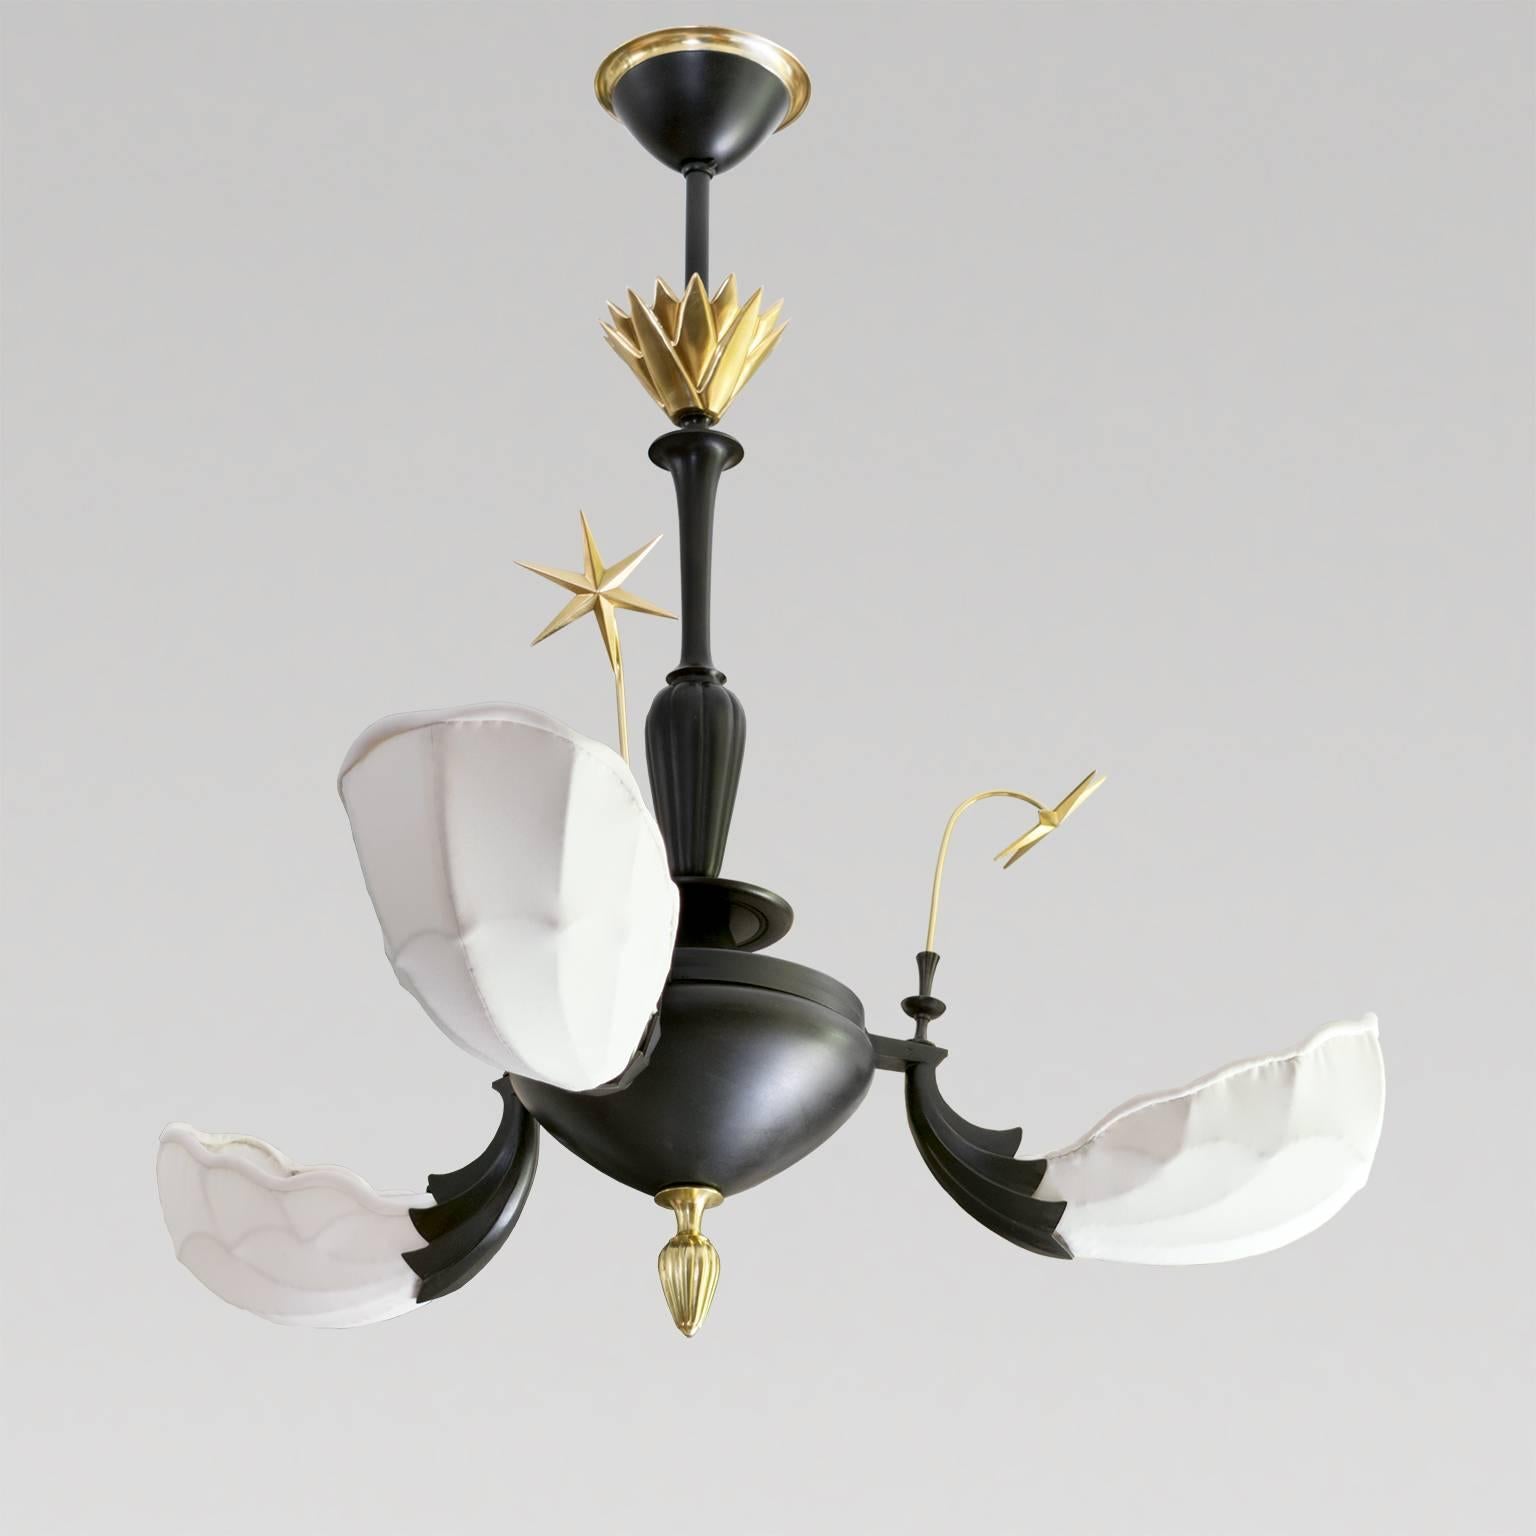 20th Century Scandinavian Modern, Art Deco Patinated and Polished Brass Three-Arm Chandelier For Sale